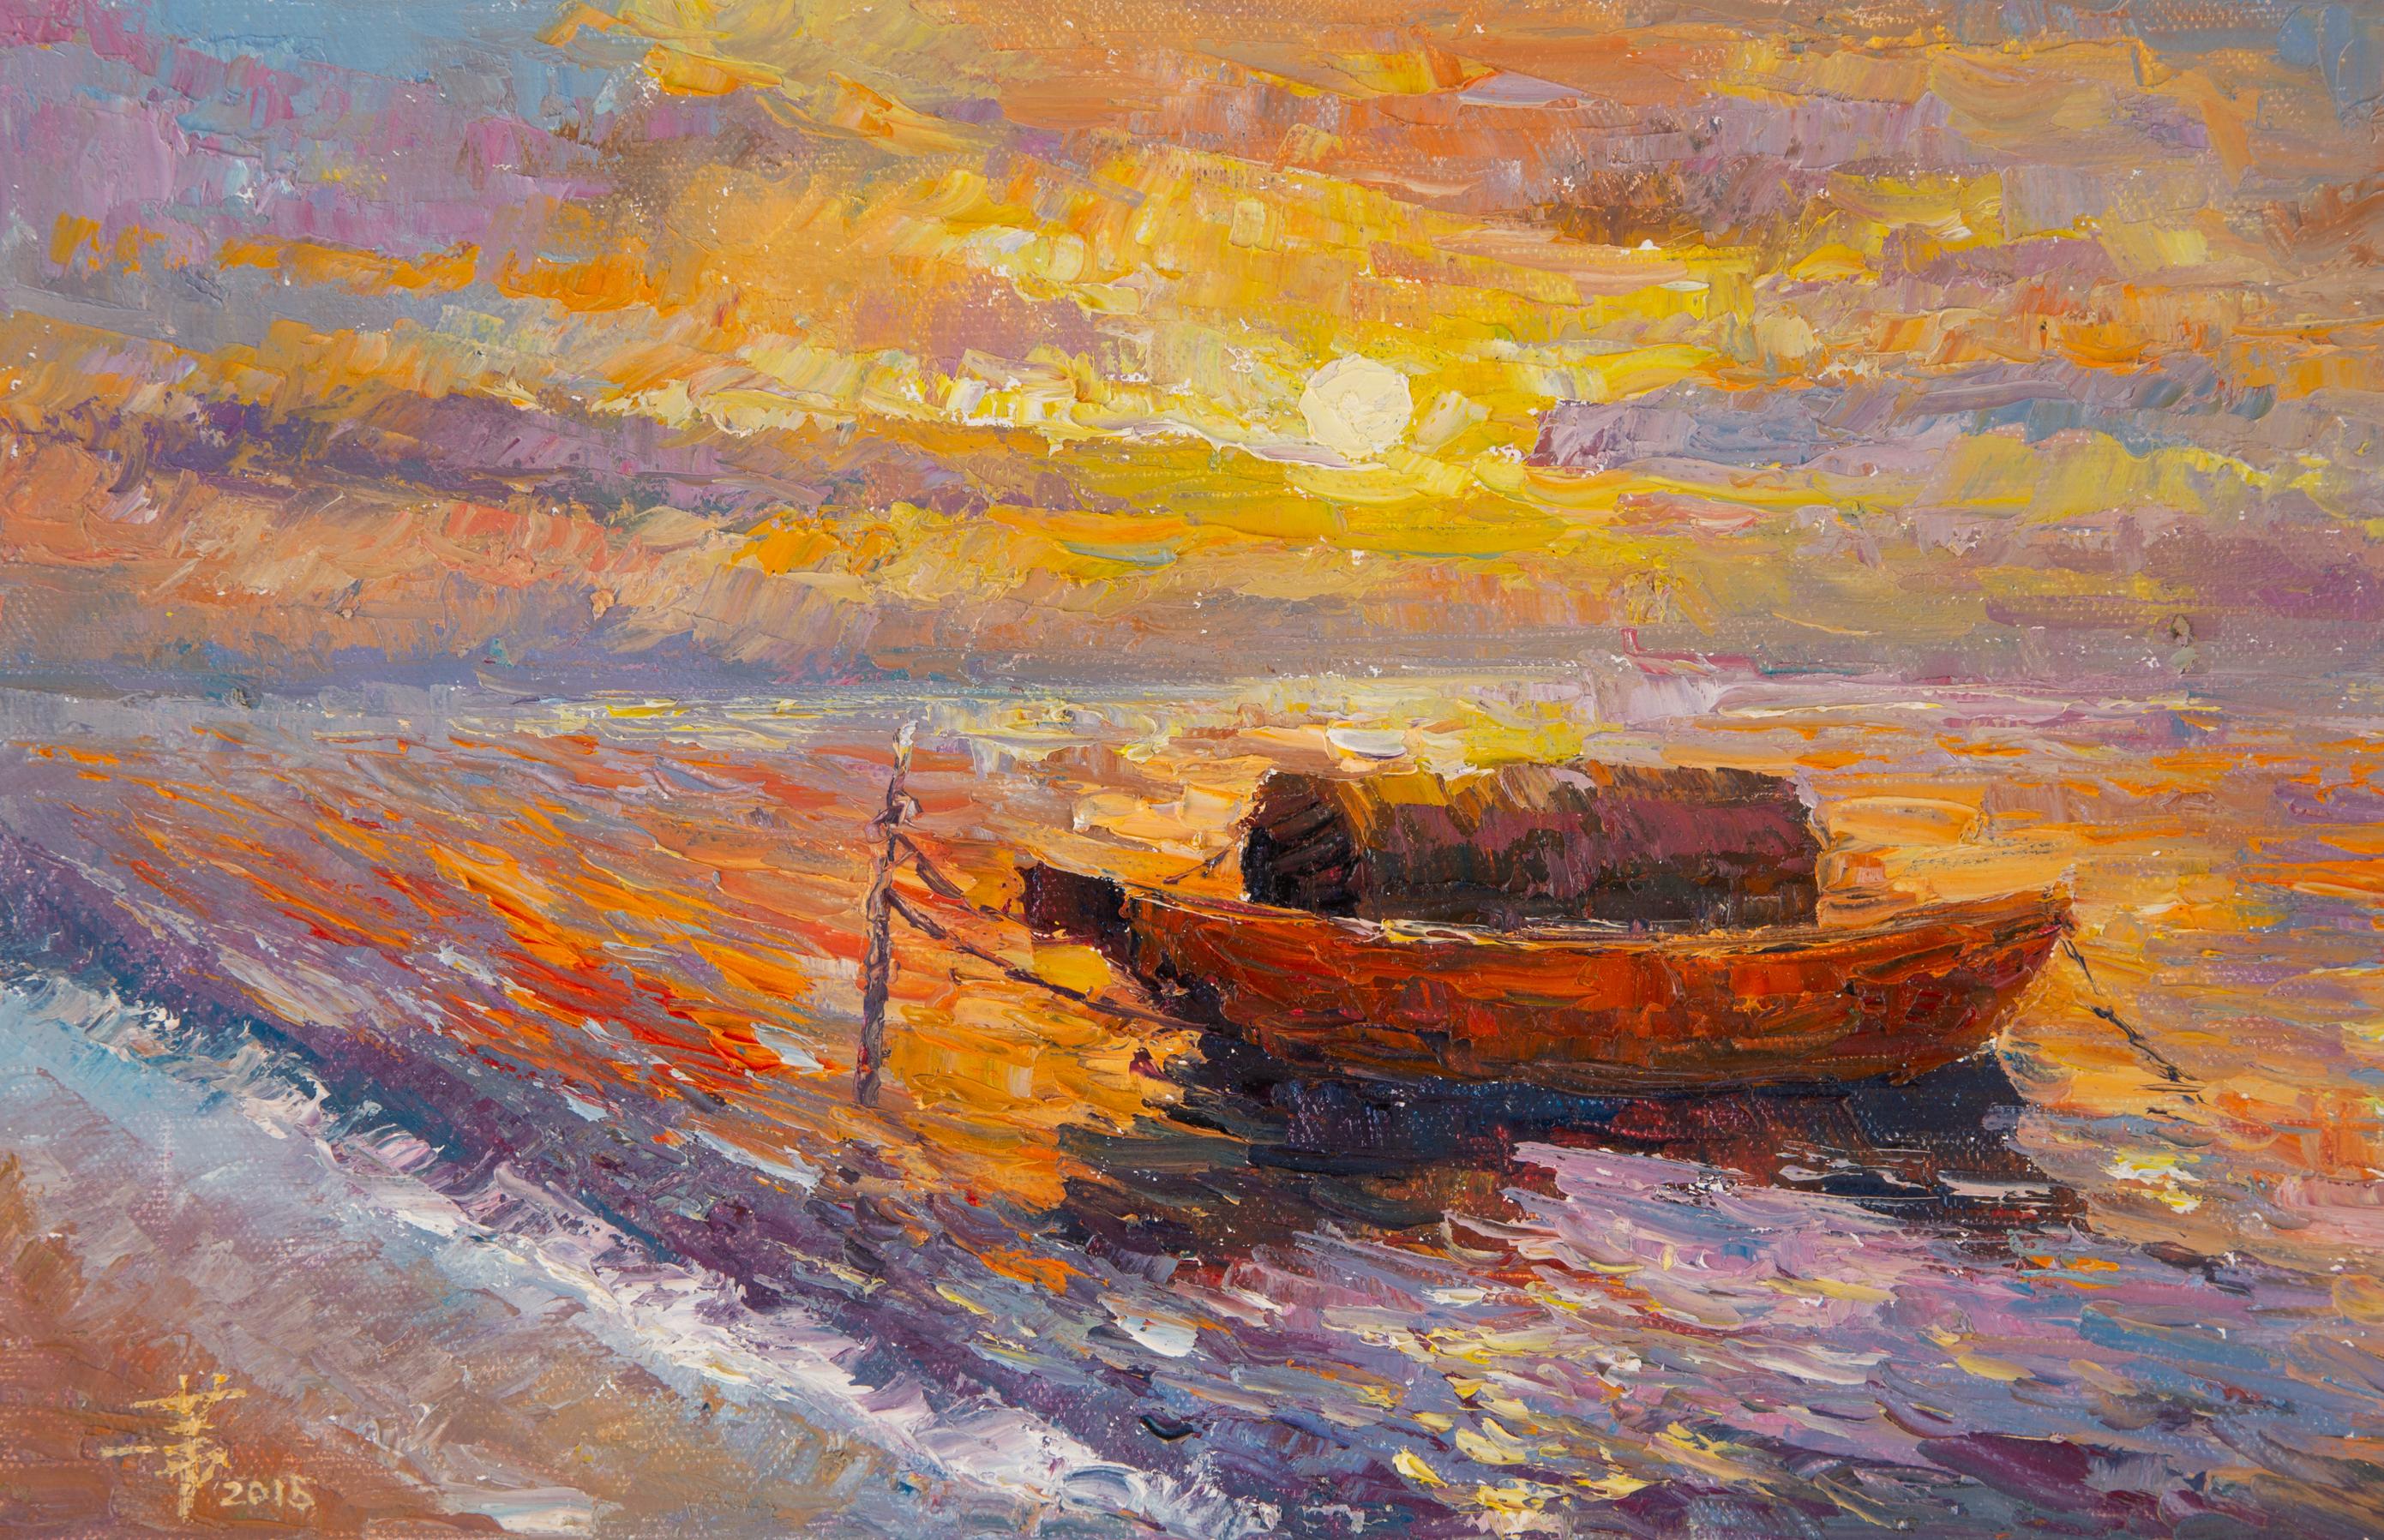 Title: Fishing Boat
Medium: Oil on canvas
Size: 7.5 x 11.5 inches
Frame: Framing options available!
Condition: The painting appears to be in excellent condition.
Note: This painting is unstretched
Year: 2015
Artist: JiWei Chen
Signature: